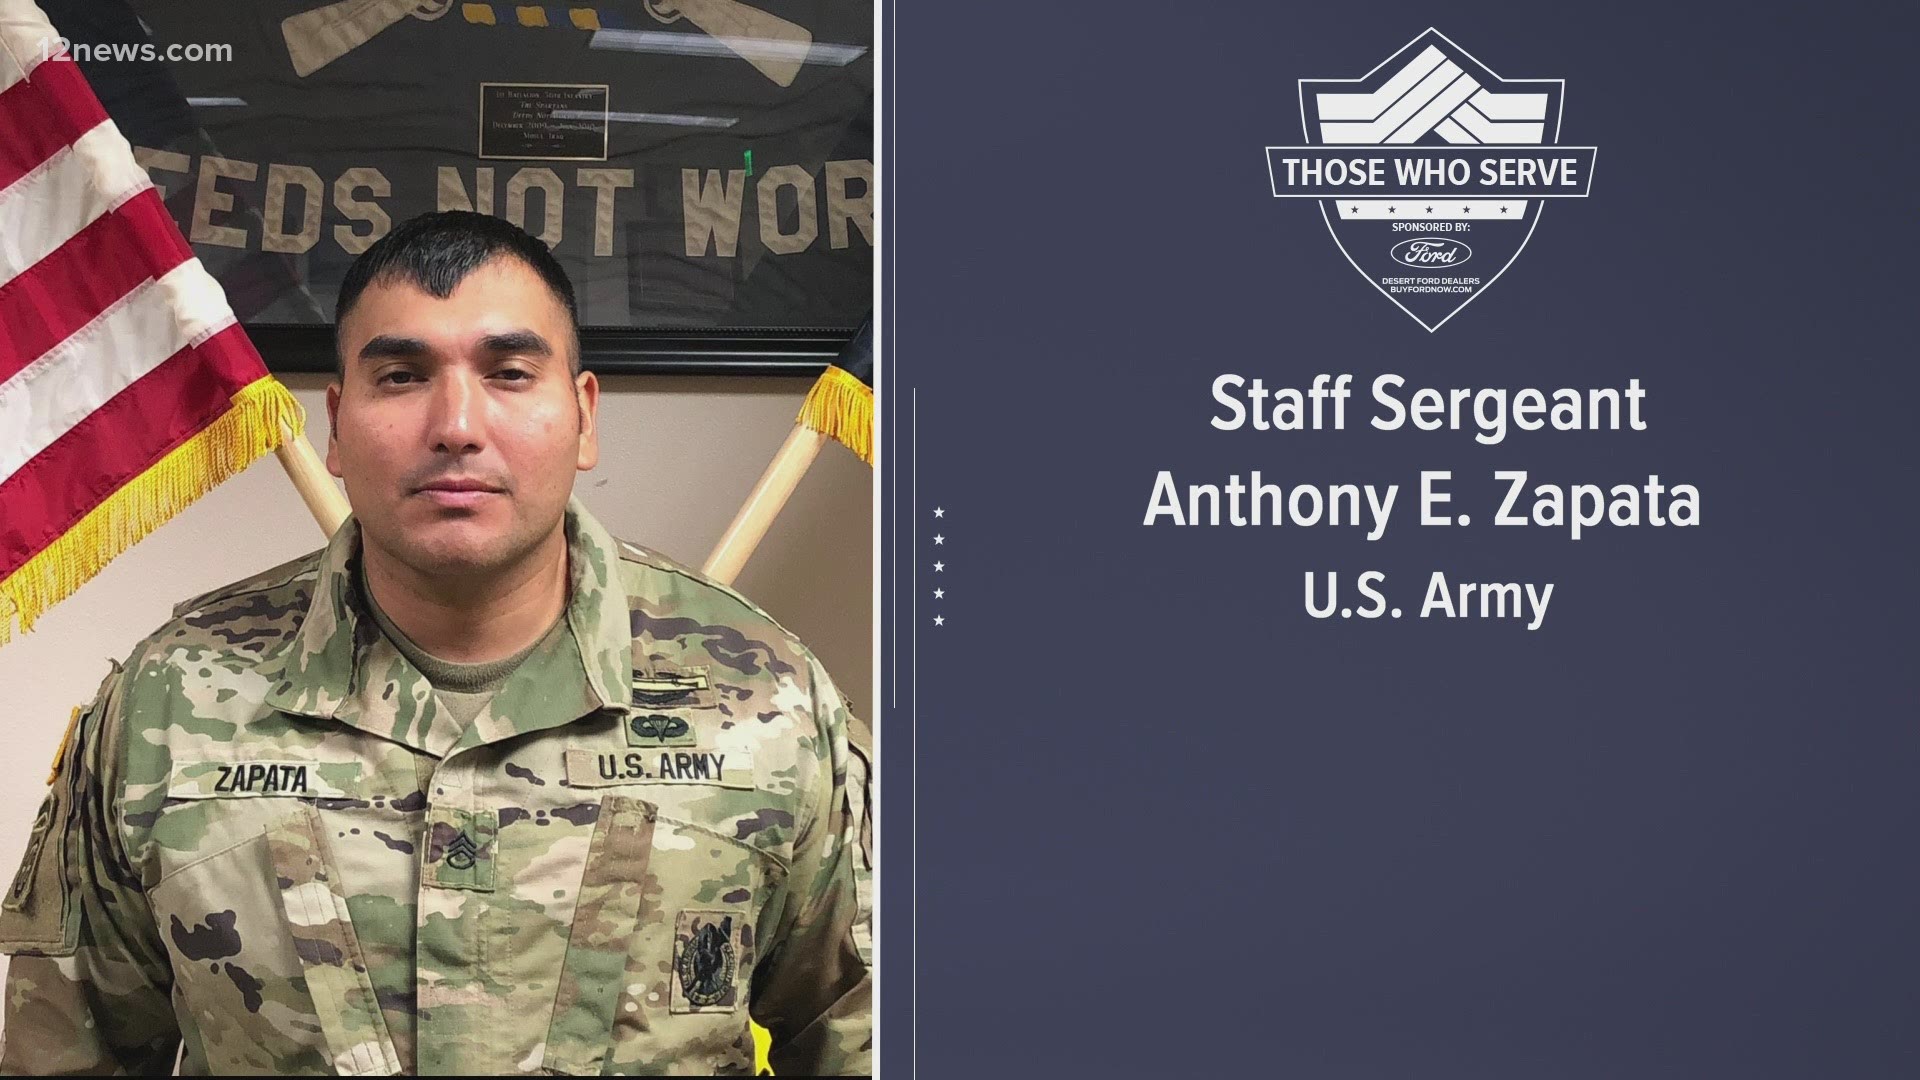 12 News is honoring Those Who Serve. This is Staff Sergeant Anthony E. Zapata of the U.S. Army and Petty Officer First Class Joseph Vincent Flores of the U.S. Navy.